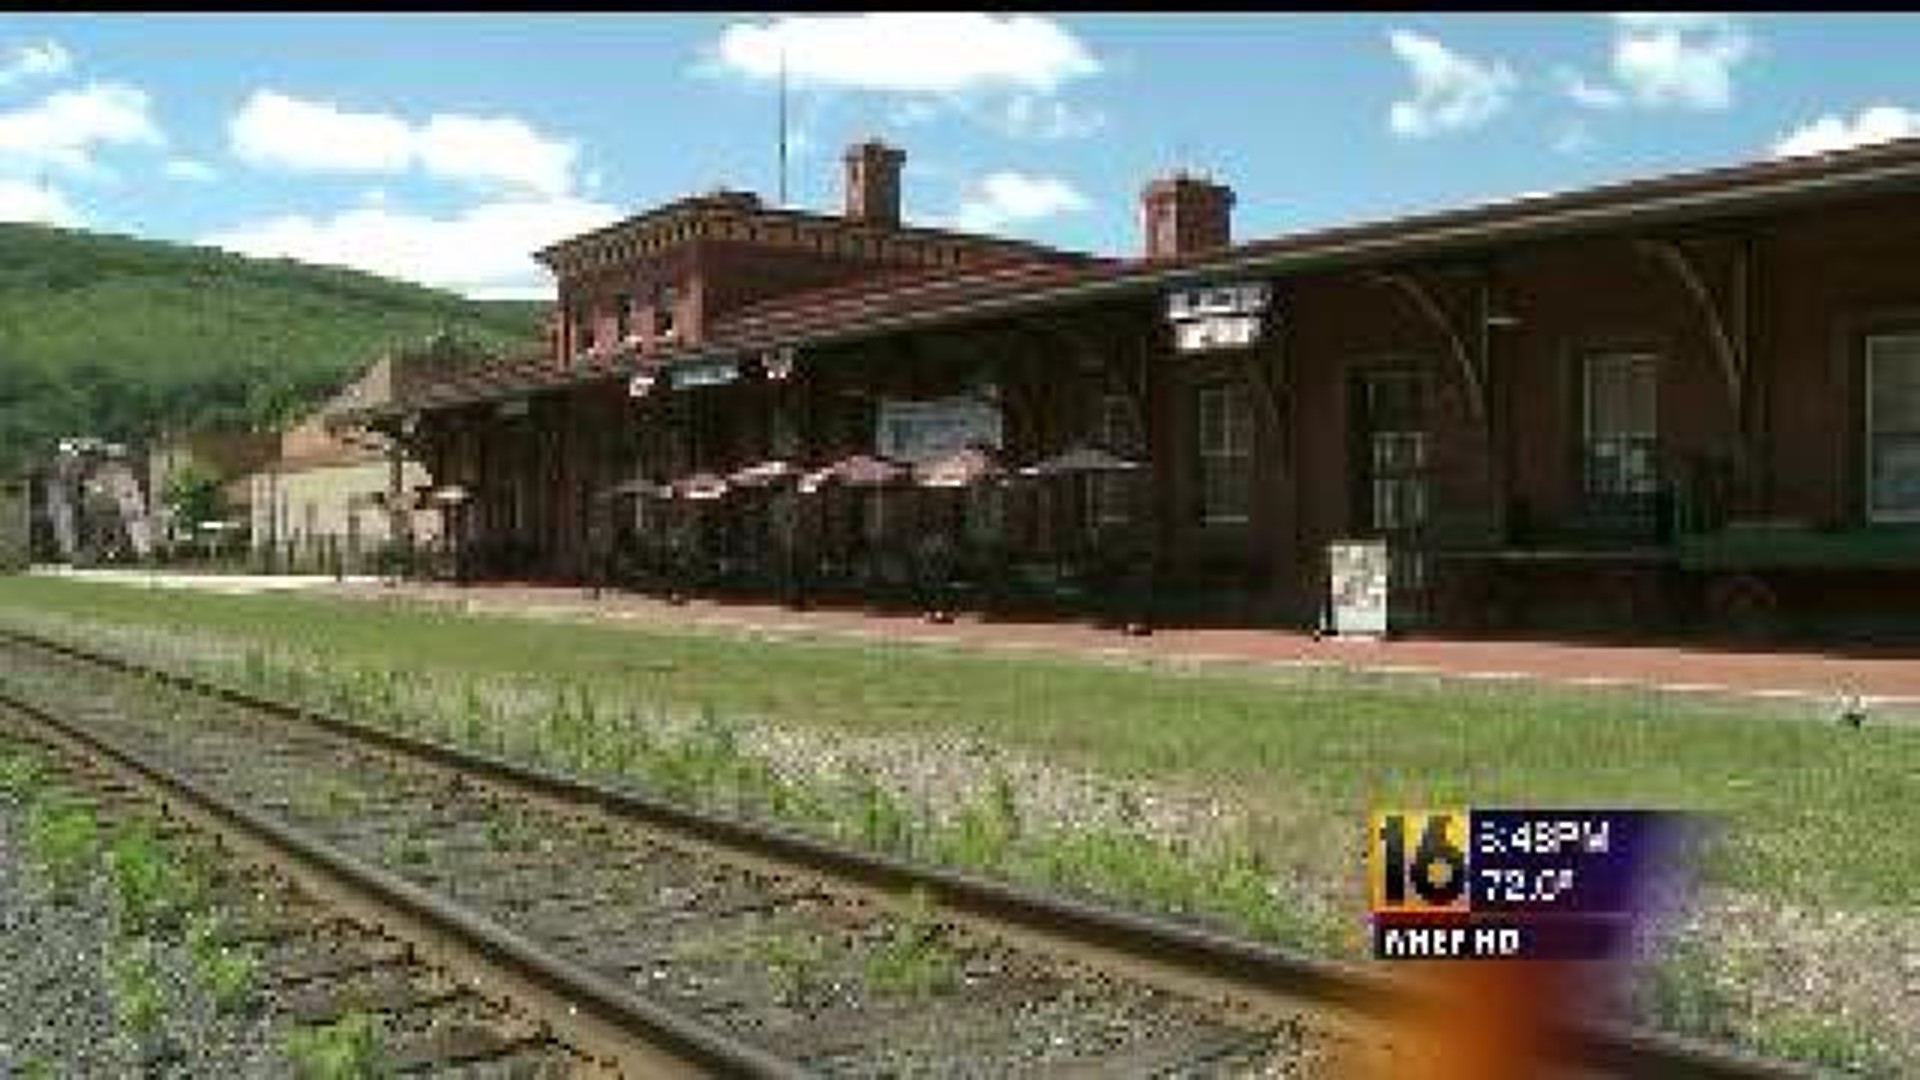 New Restaurant Opens In Historic Train Station